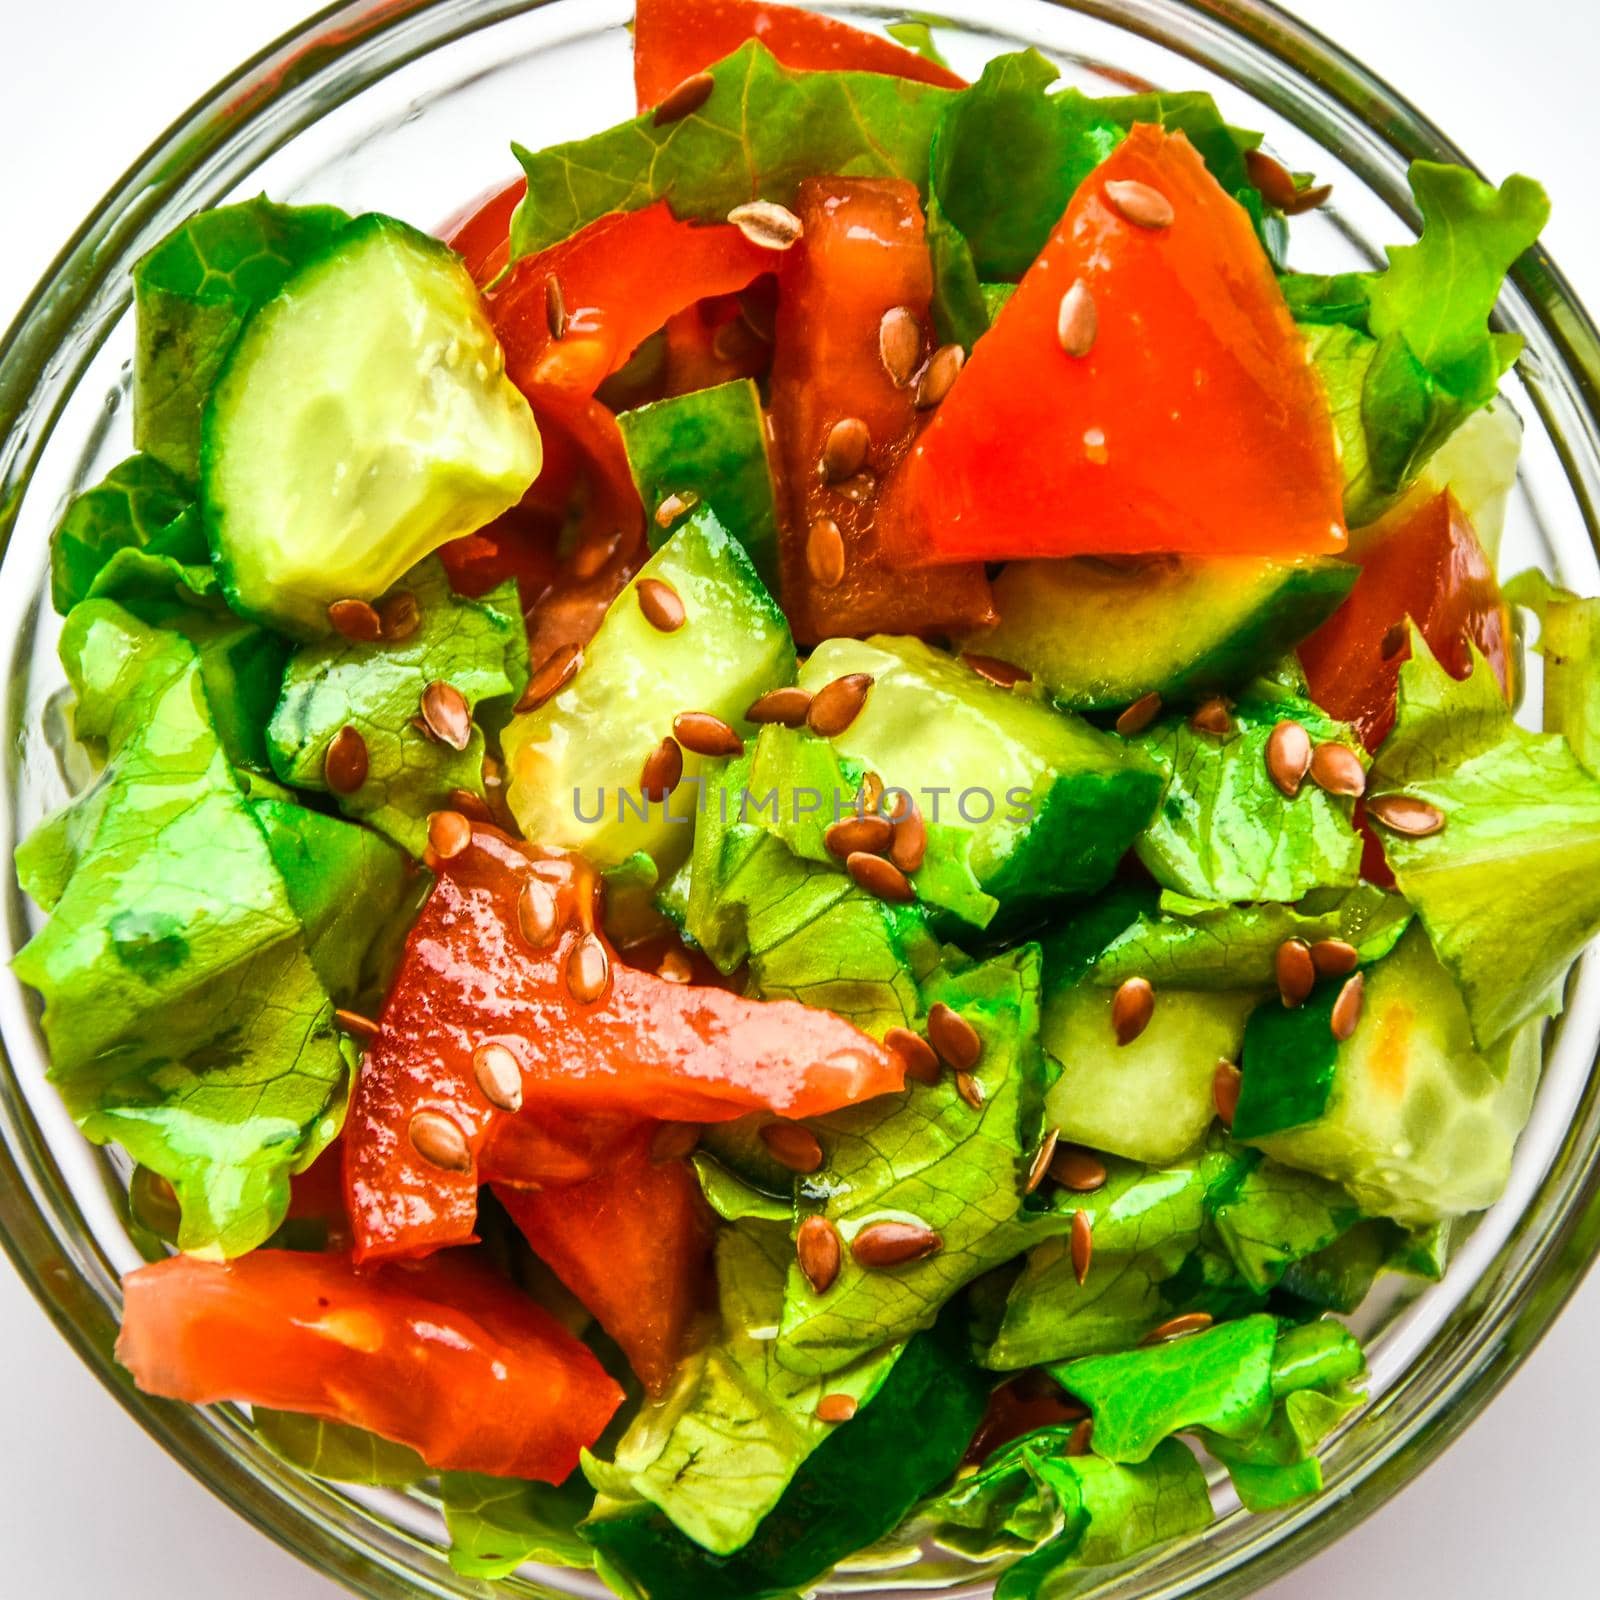 served plate with fresh salad from tomatoes, cucumbers, salad leaves and flax seeds isolated on white background, Top view, Copy space for text, Vegan diet food